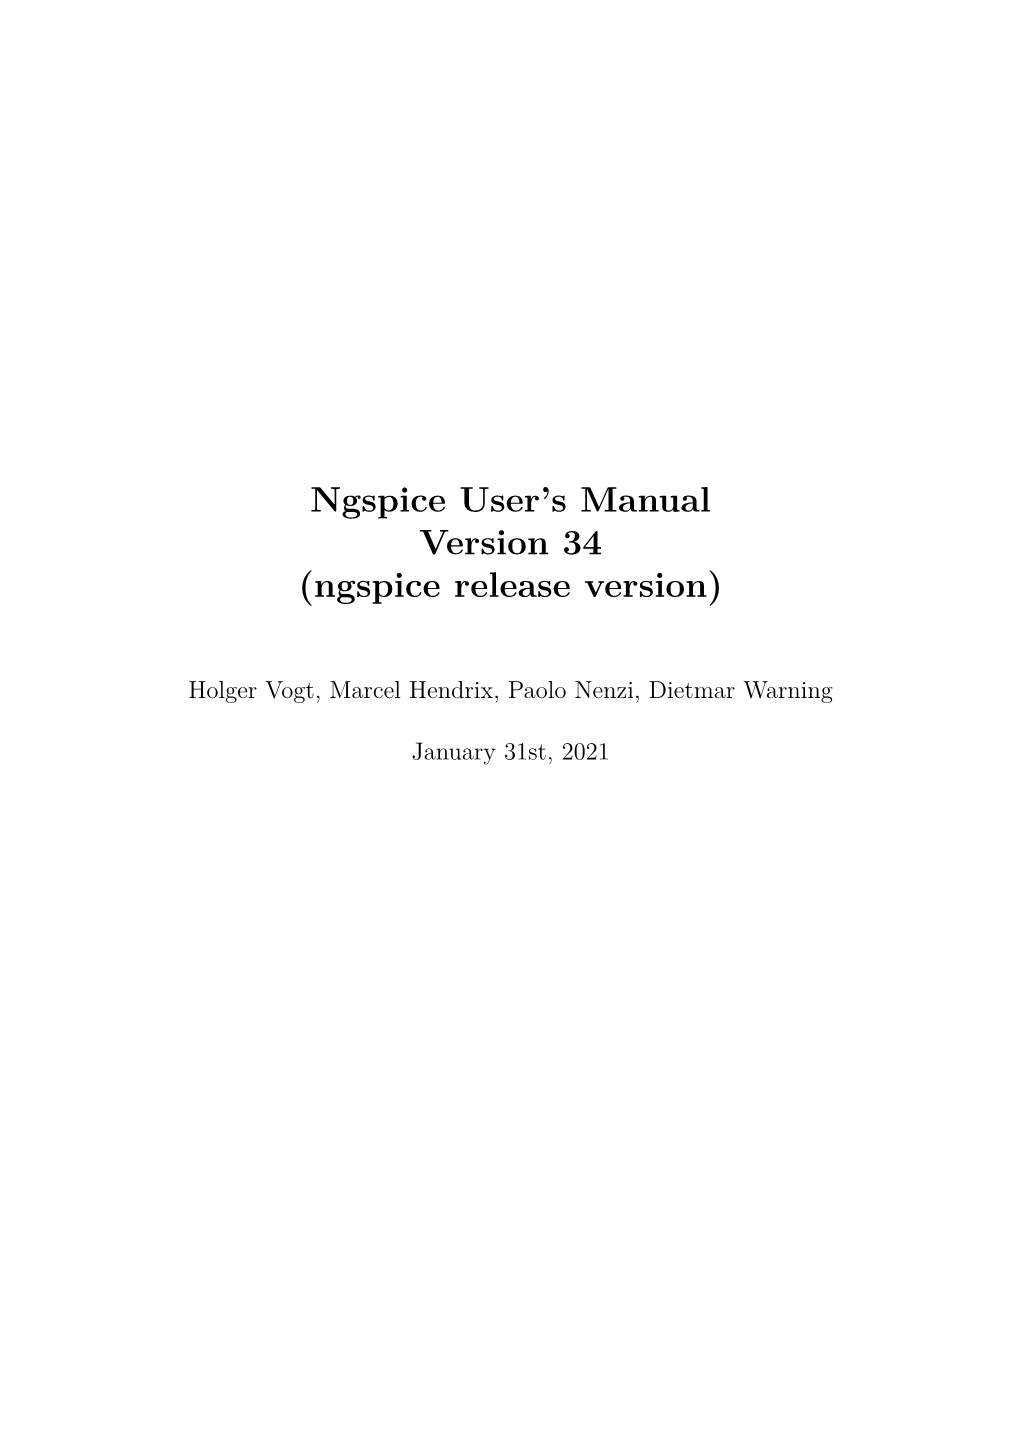 Ngspice User's Manual (Version 34)